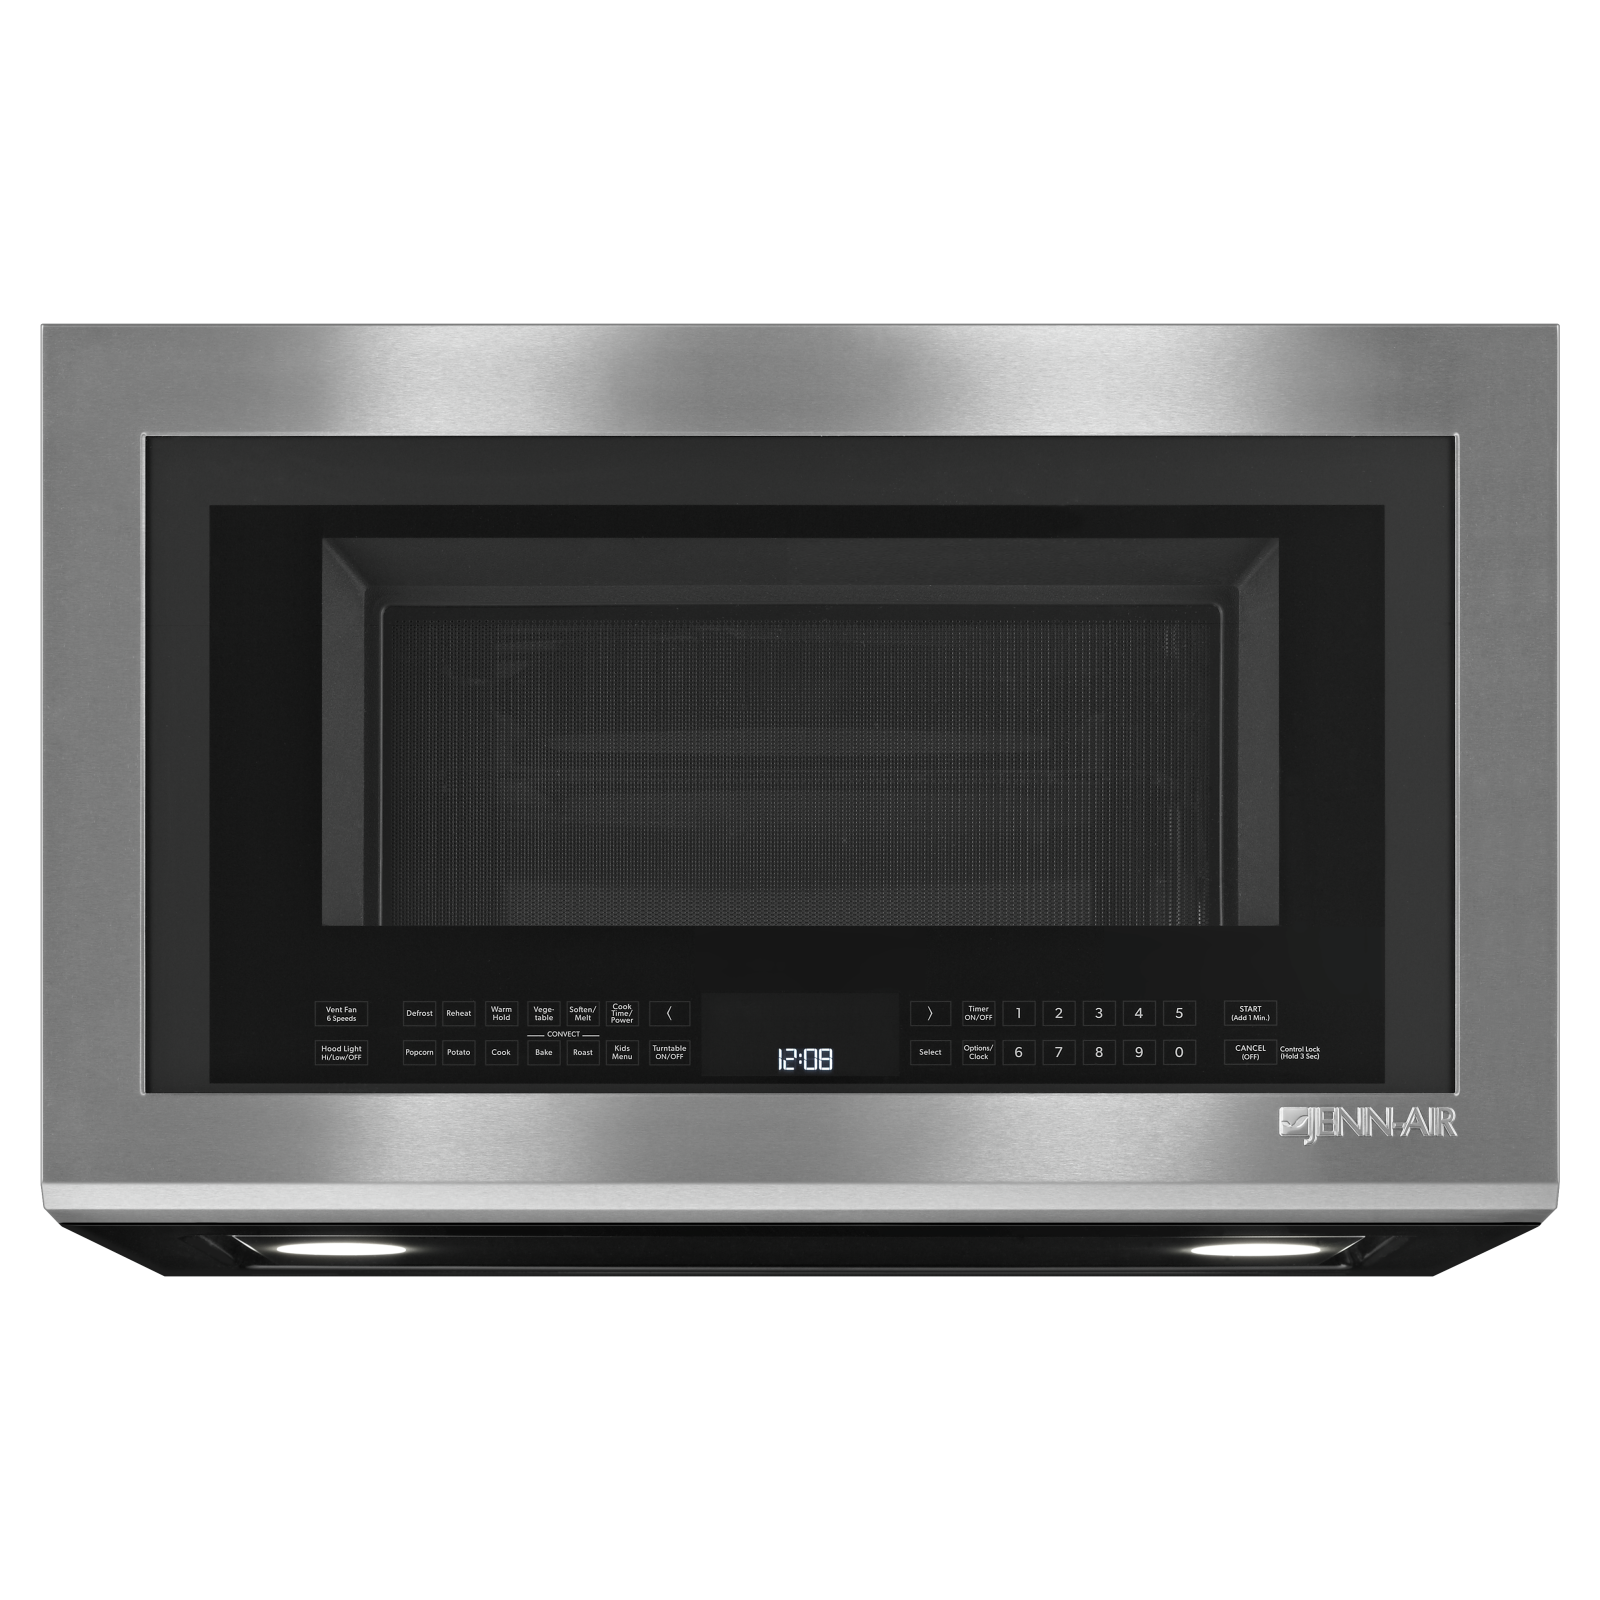 JennAir - 1.9 cu. Ft  Over the range Microwave in Stainless - YJMV9196CS